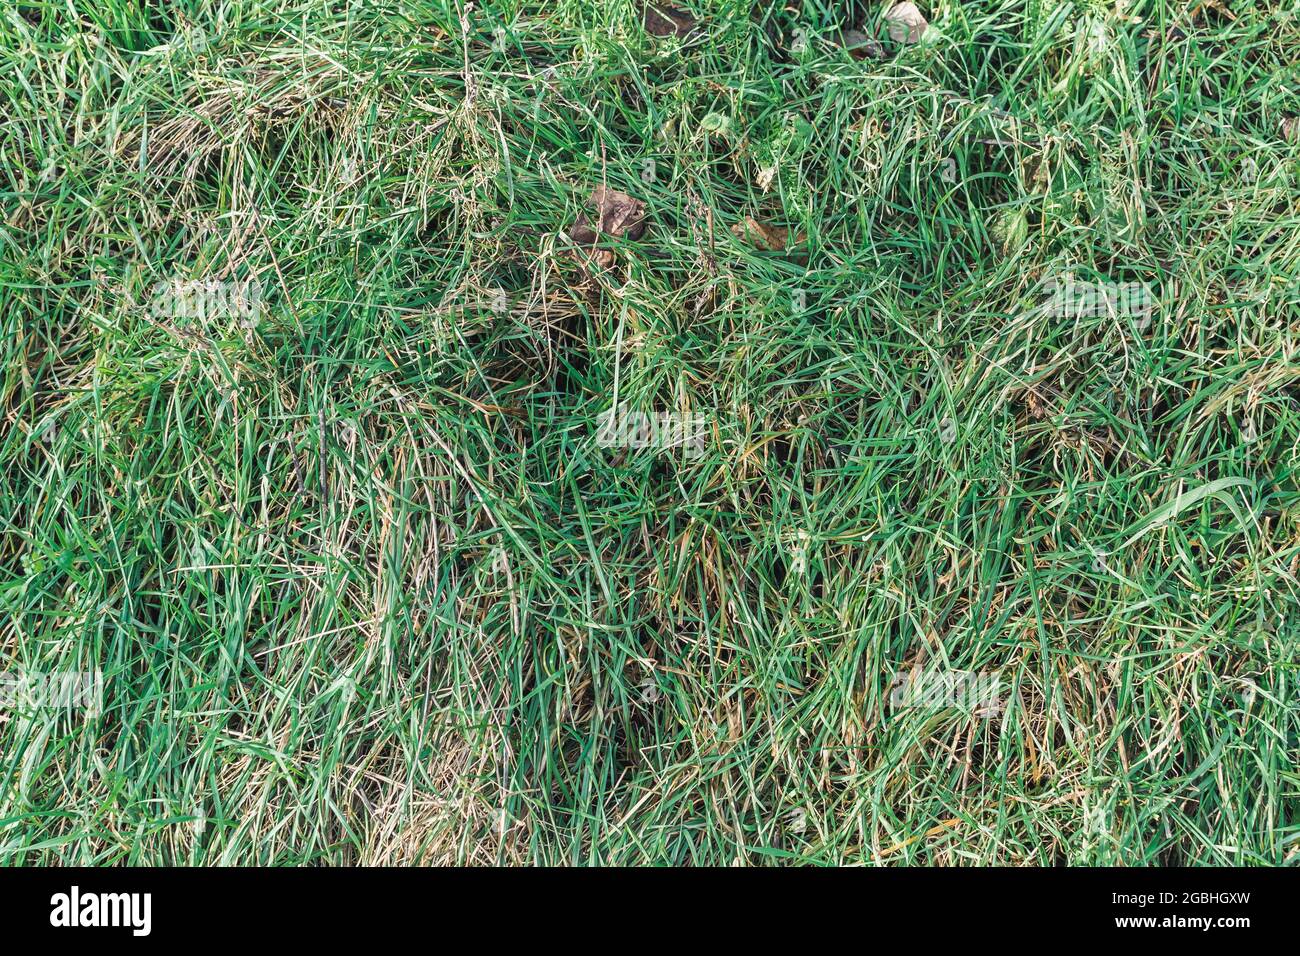 Top view of bermudagrass in the ground Stock Photo